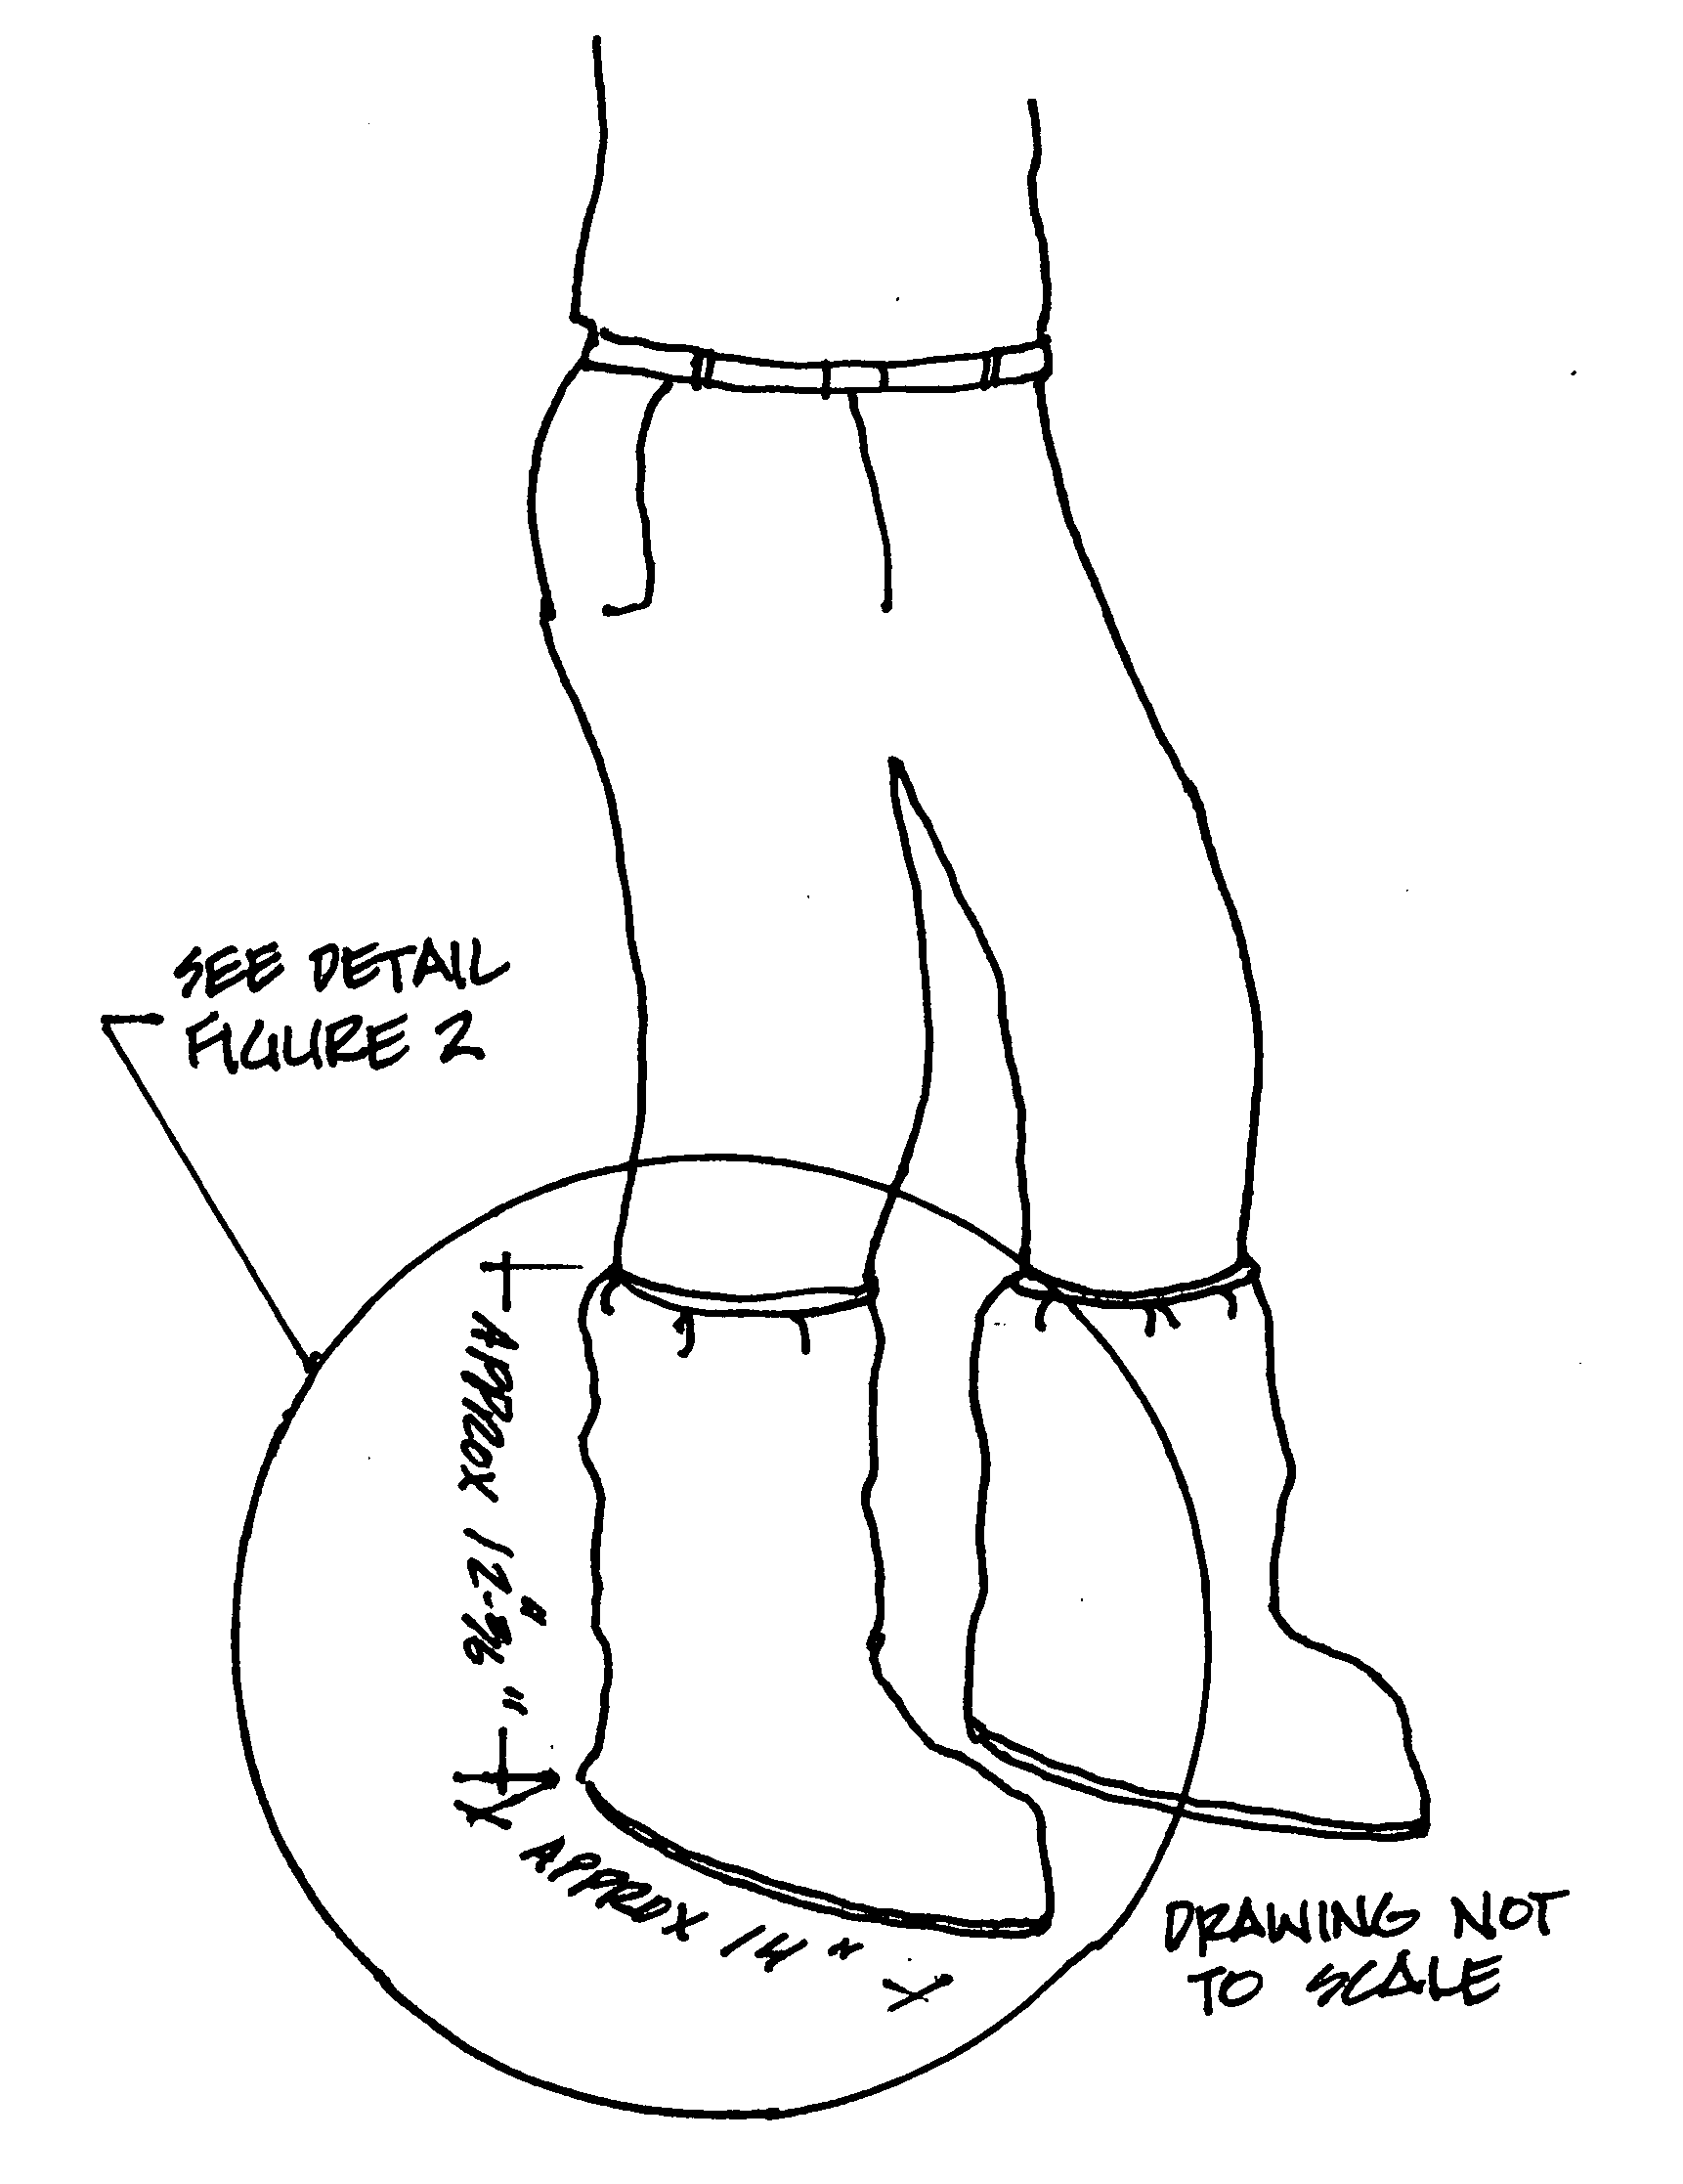 Hunting foot covers and method of use